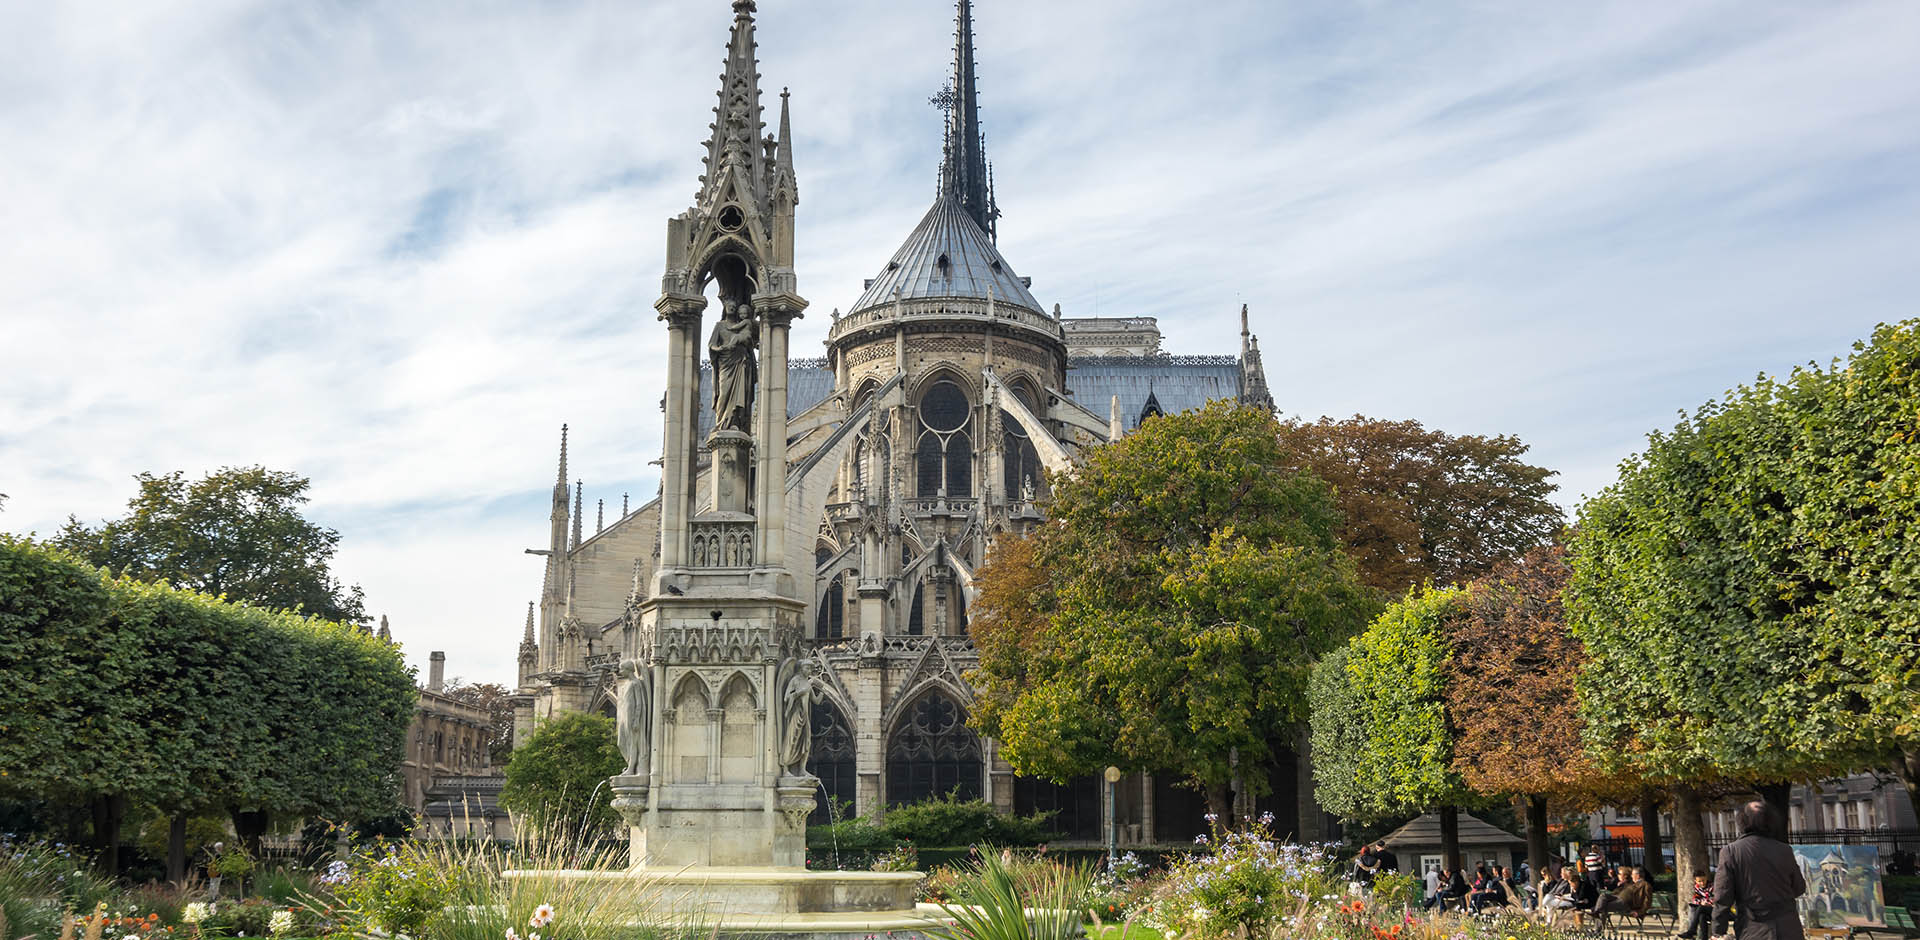 Notre-dame Paris France best place to visit in Europe